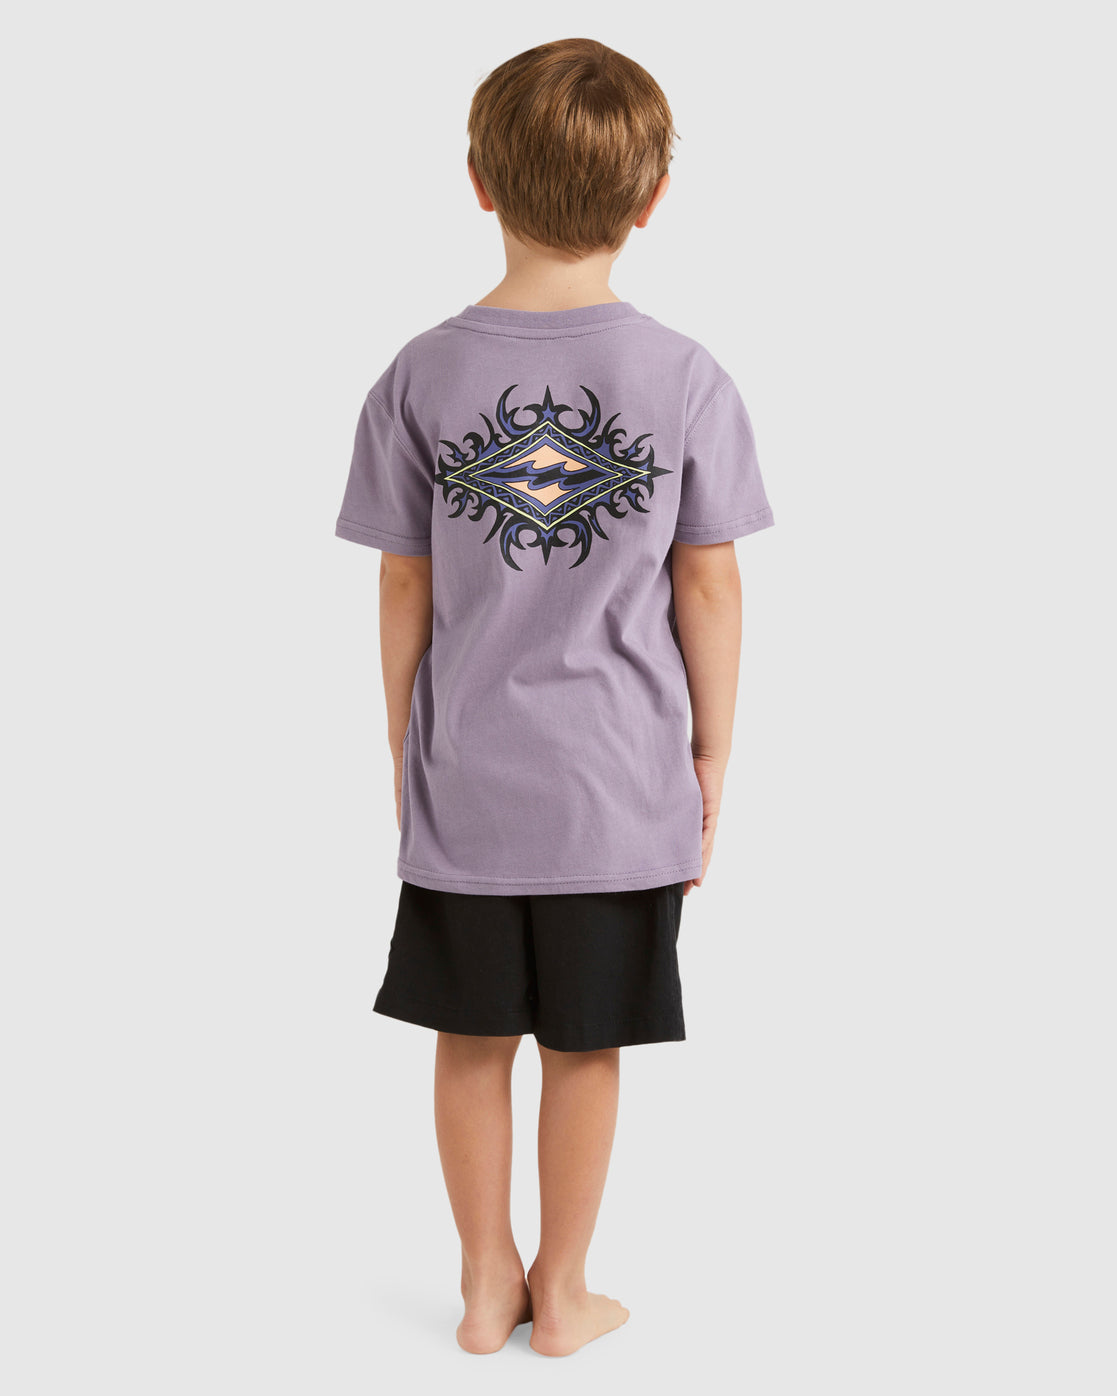 Billabong Boys Tribe Core Tee in purple ash from back